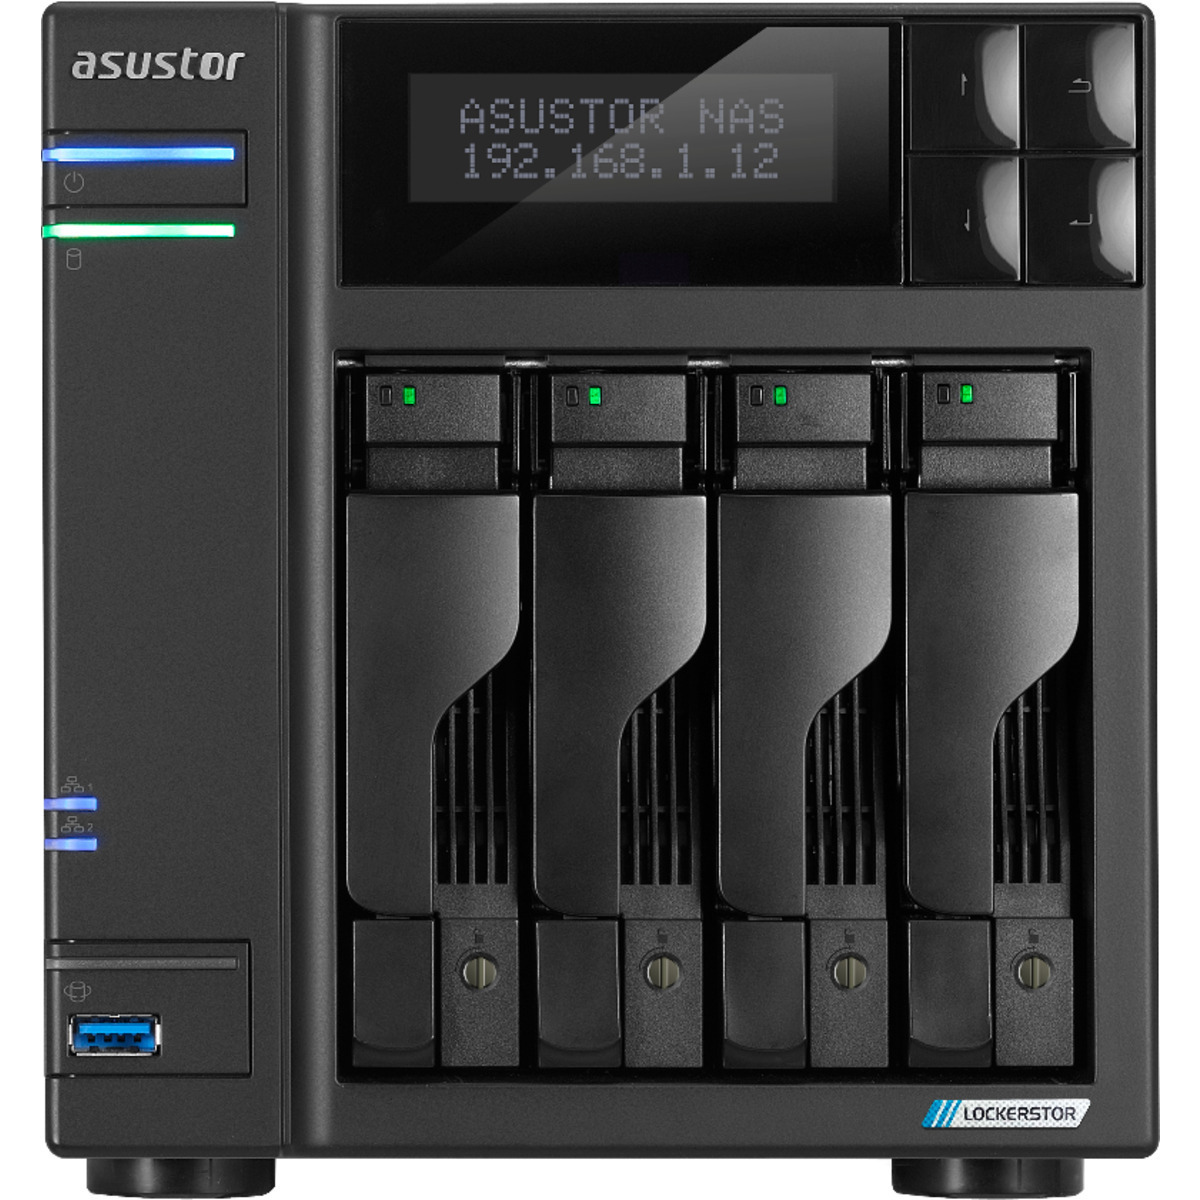 buy ASUSTOR LOCKERSTOR 4 Gen2 AS6704T 72tb Desktop NAS - Network Attached Storage Device 4x18000gb Seagate IronWolf Pro ST18000NT001 3.5 7200rpm SATA 6Gb/s HDD NAS Class Drives Installed - Burn-In Tested - FREE RAM UPGRADE - nas headquarters buy network attached storage server device das new raid-5 free shipping simply usa christmas holiday black friday cyber monday week sale happening now! LOCKERSTOR 4 Gen2 AS6704T